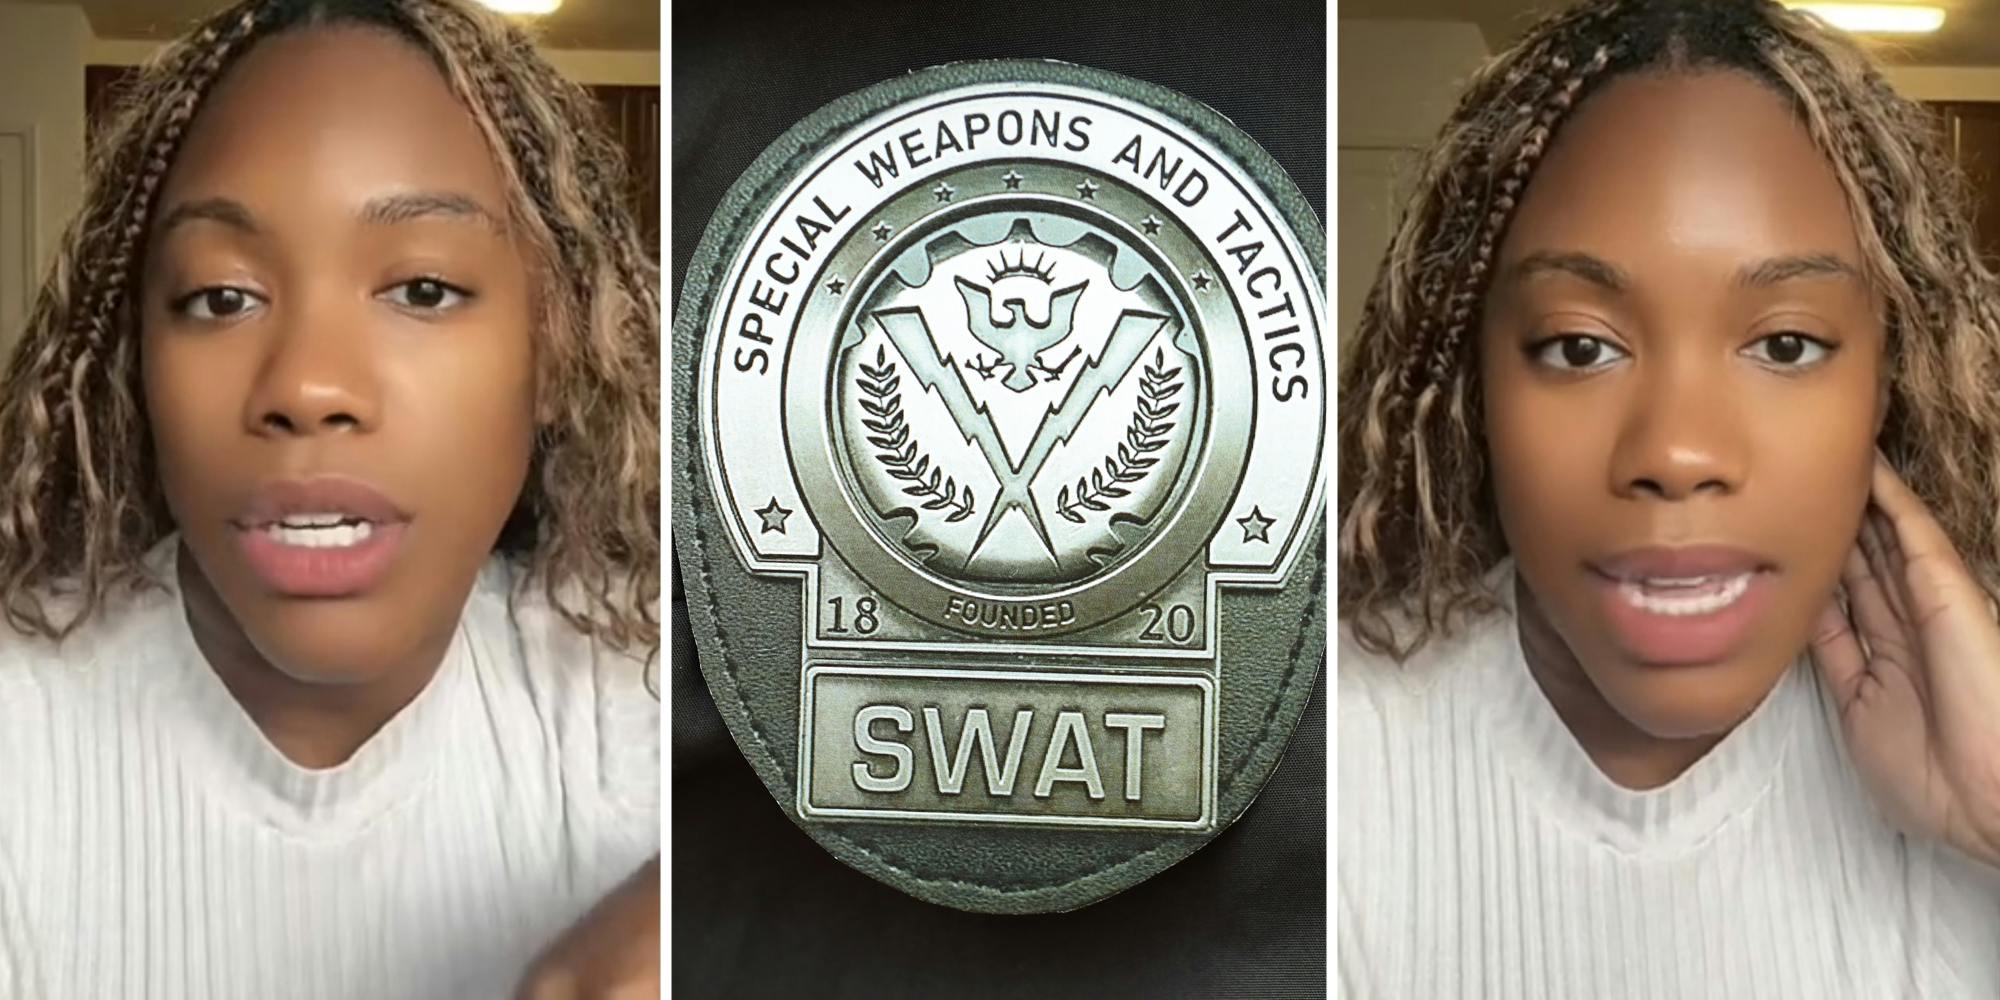 ‘I do know it was her’: Black woman says her white neighbor called a SWAT team on her